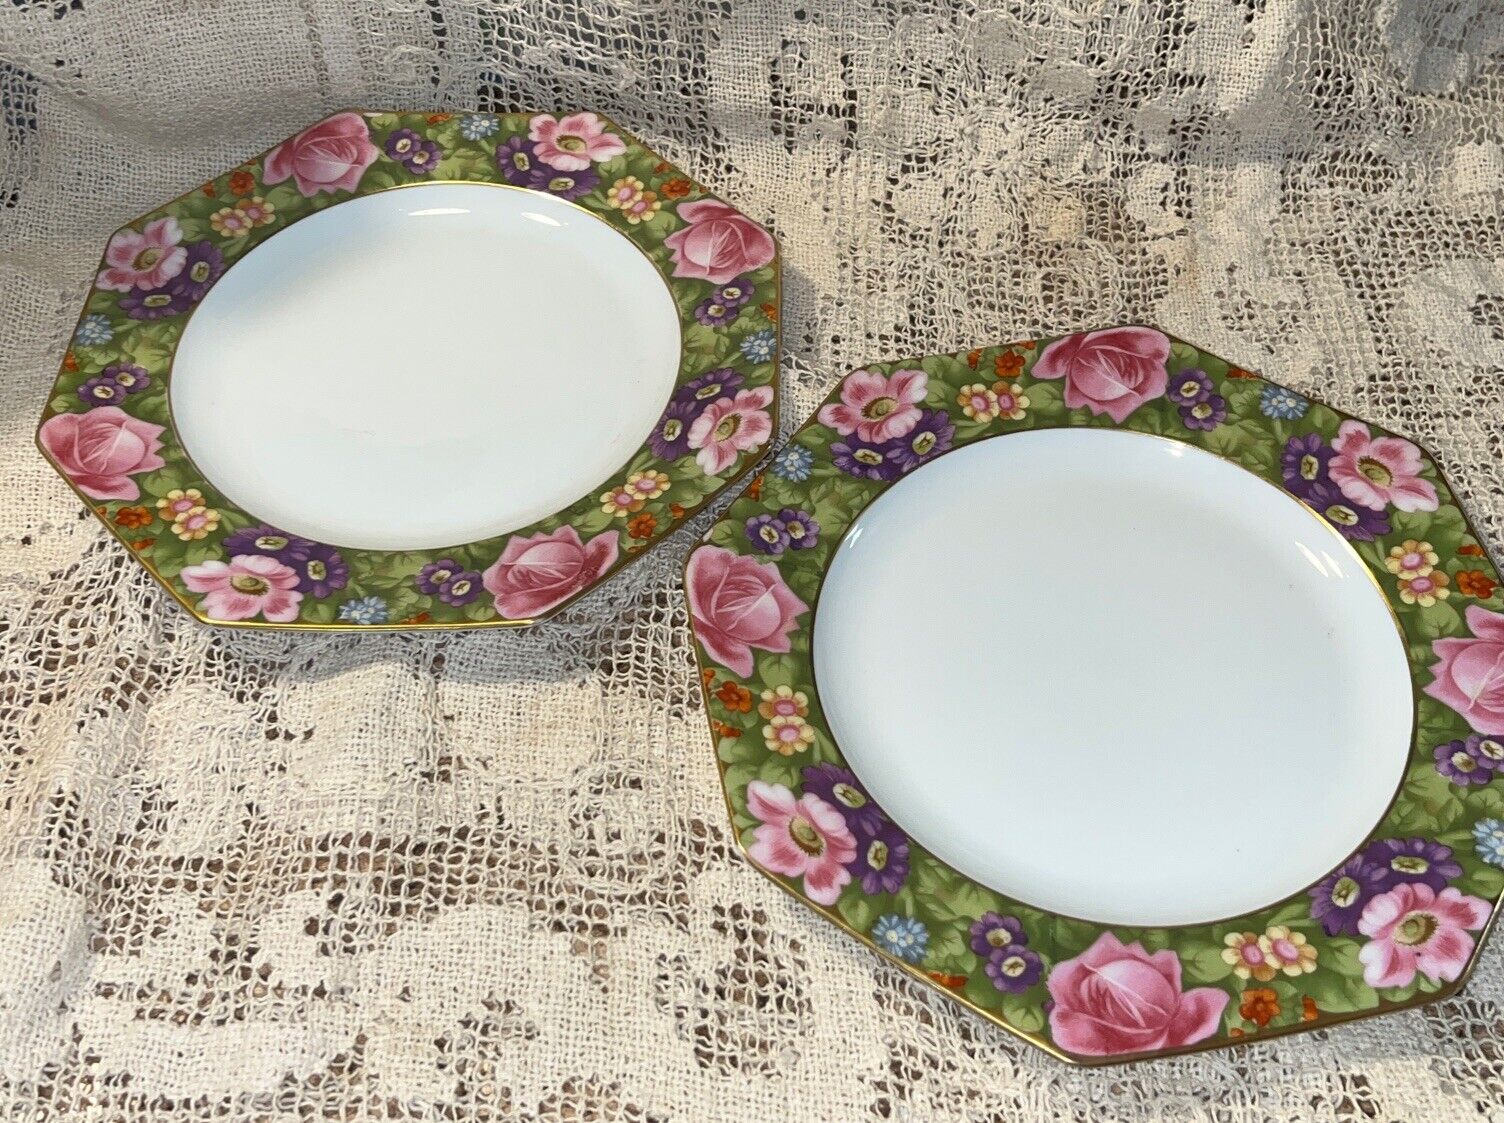 SET OF 2 ROSENTHAL MULTI COLORED FLORAL 8.5/8” OCTAGONAL LUNCHEON PLATES